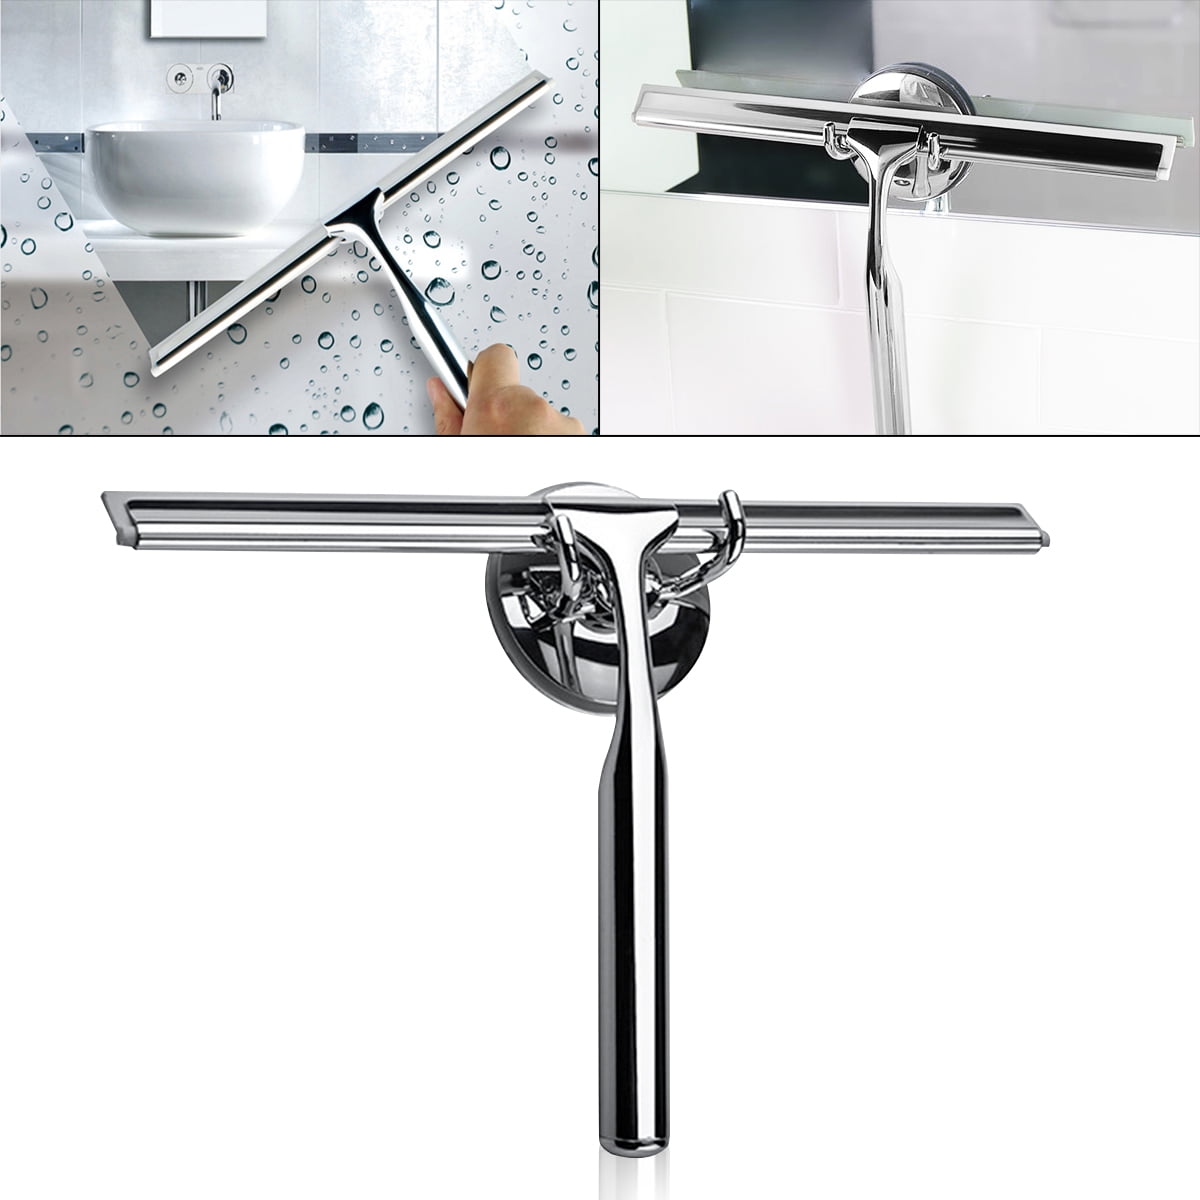 Glass Wiper Glass Squeegee Shower Chrome White Wall Mount Bathroom Accessories Joop 